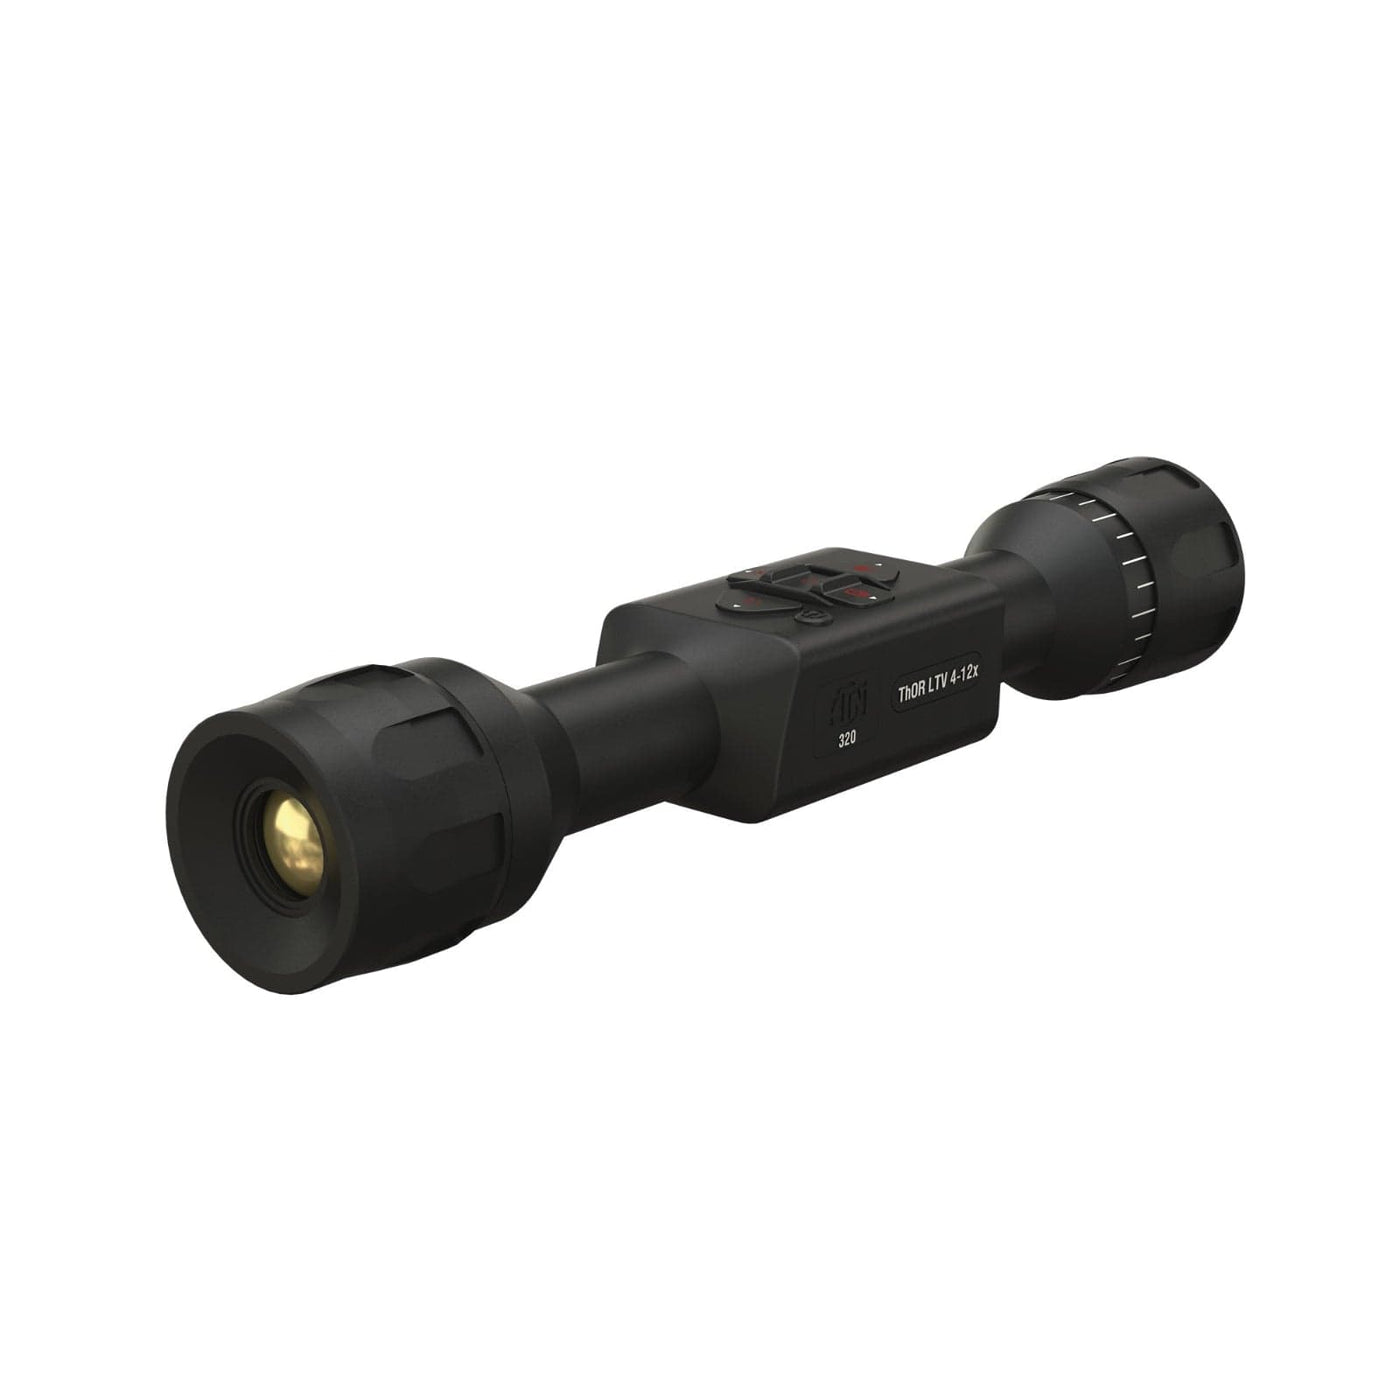 ATN ATN Thor LTV 4-12x 320x240 12mic Thermal Rifle Scope w Video 320x240 Nightvision And Thermal